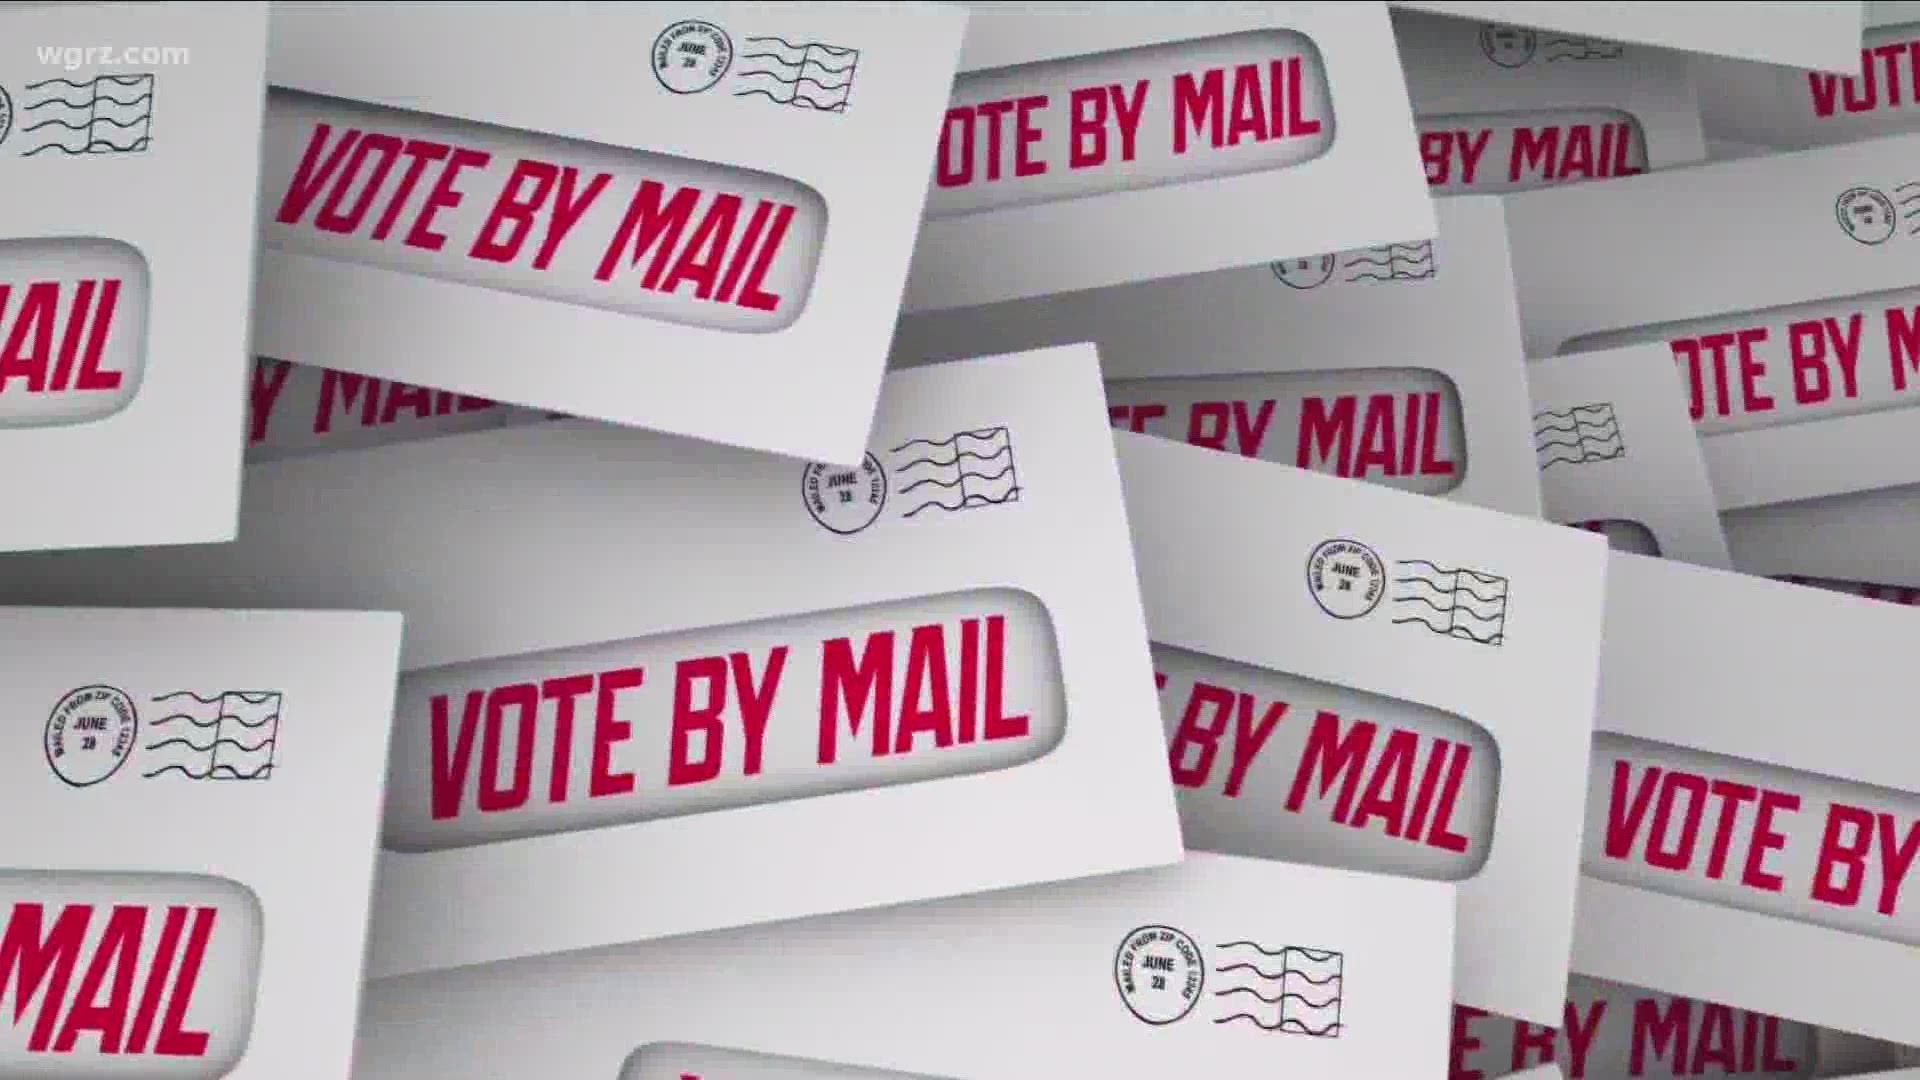 Our town hall looks at voting by mail